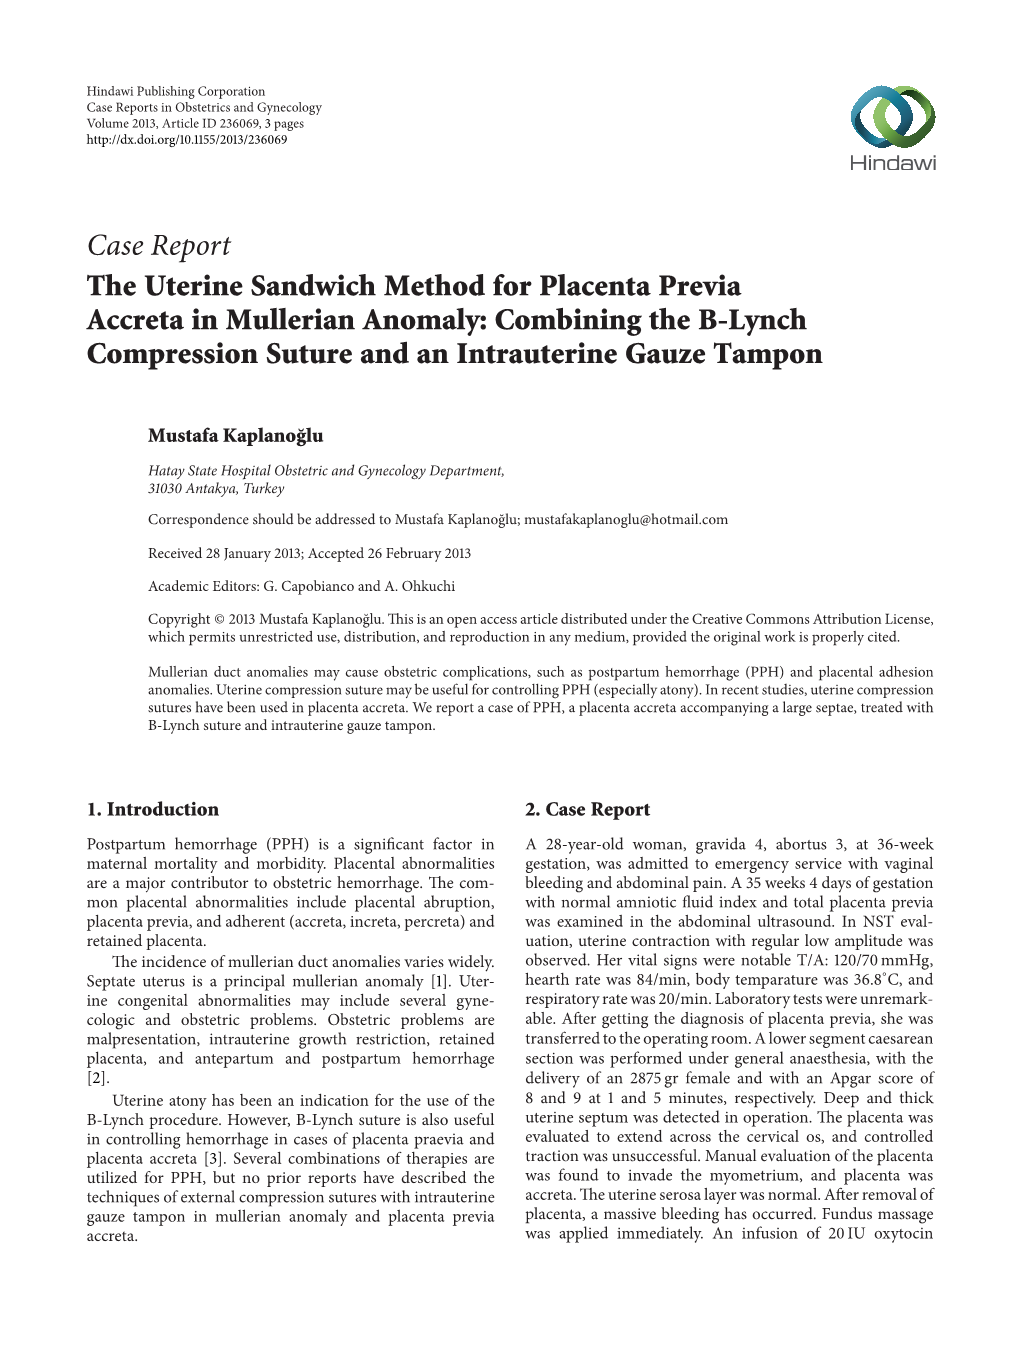 The Uterine Sandwich Method for Placenta Previa Accreta in Mullerian Anomaly: Combining the B-Lynch Compression Suture and an Intrauterine Gauze Tampon